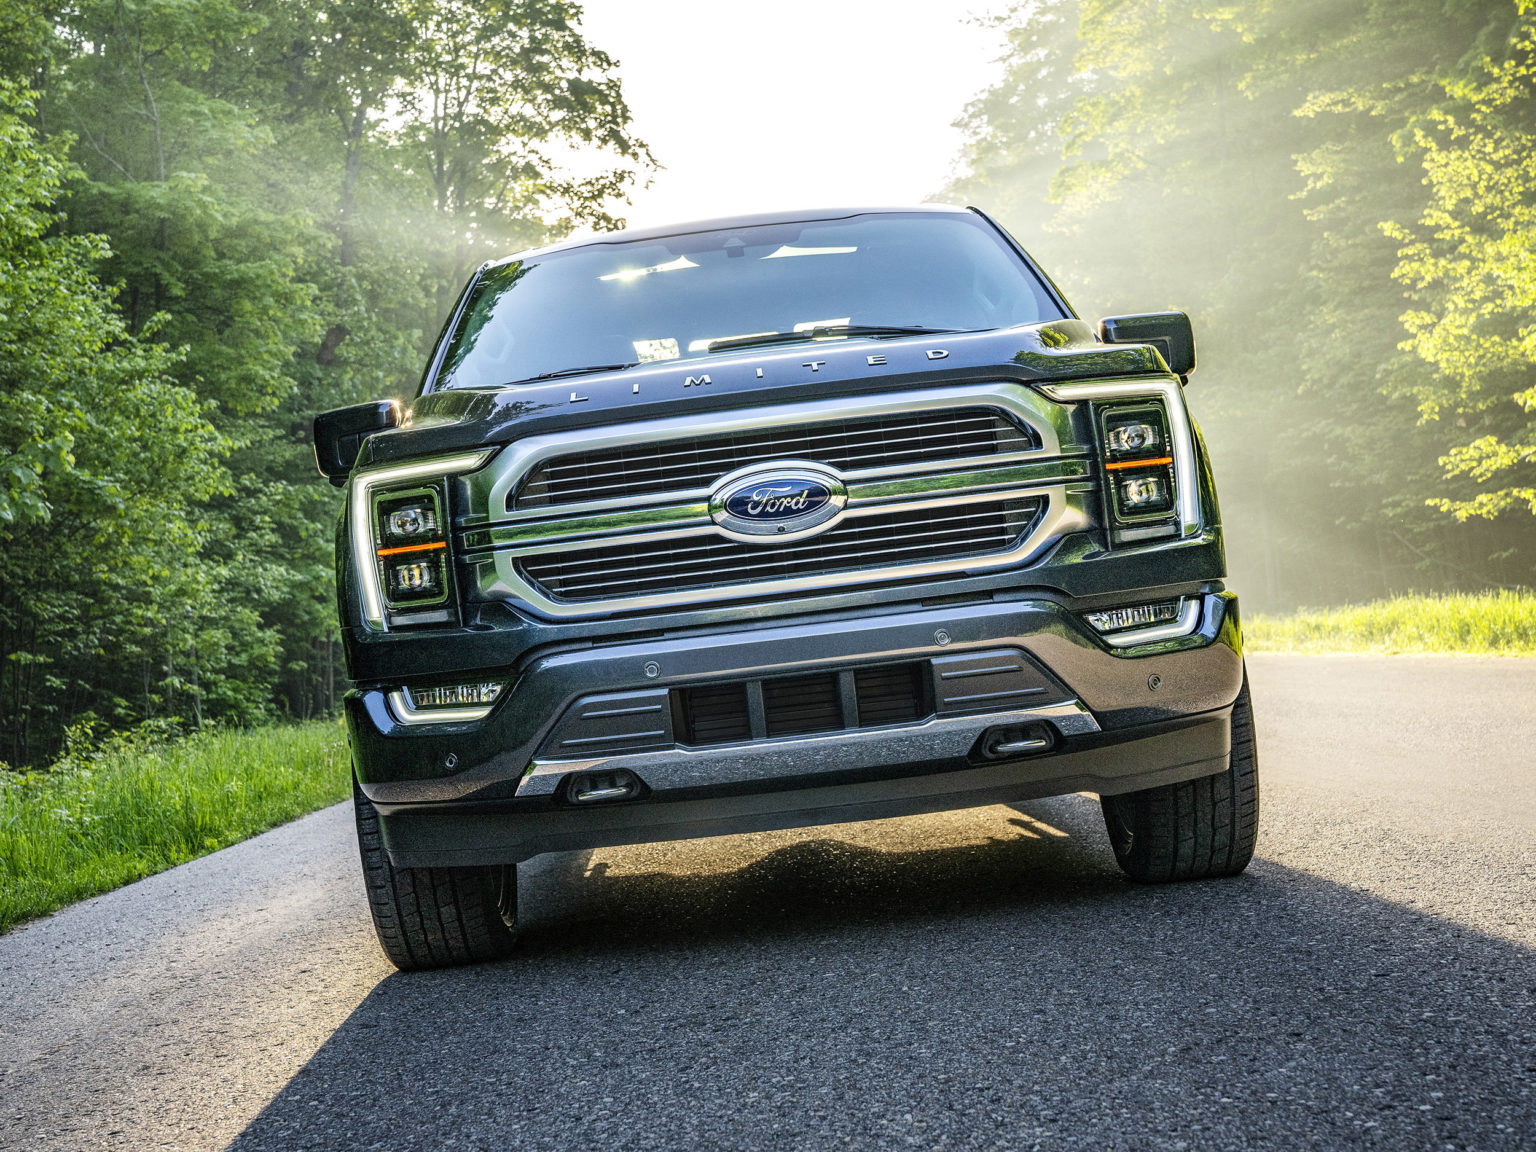 Ford has redesigned the Ford F-150 for the 2021 model year.